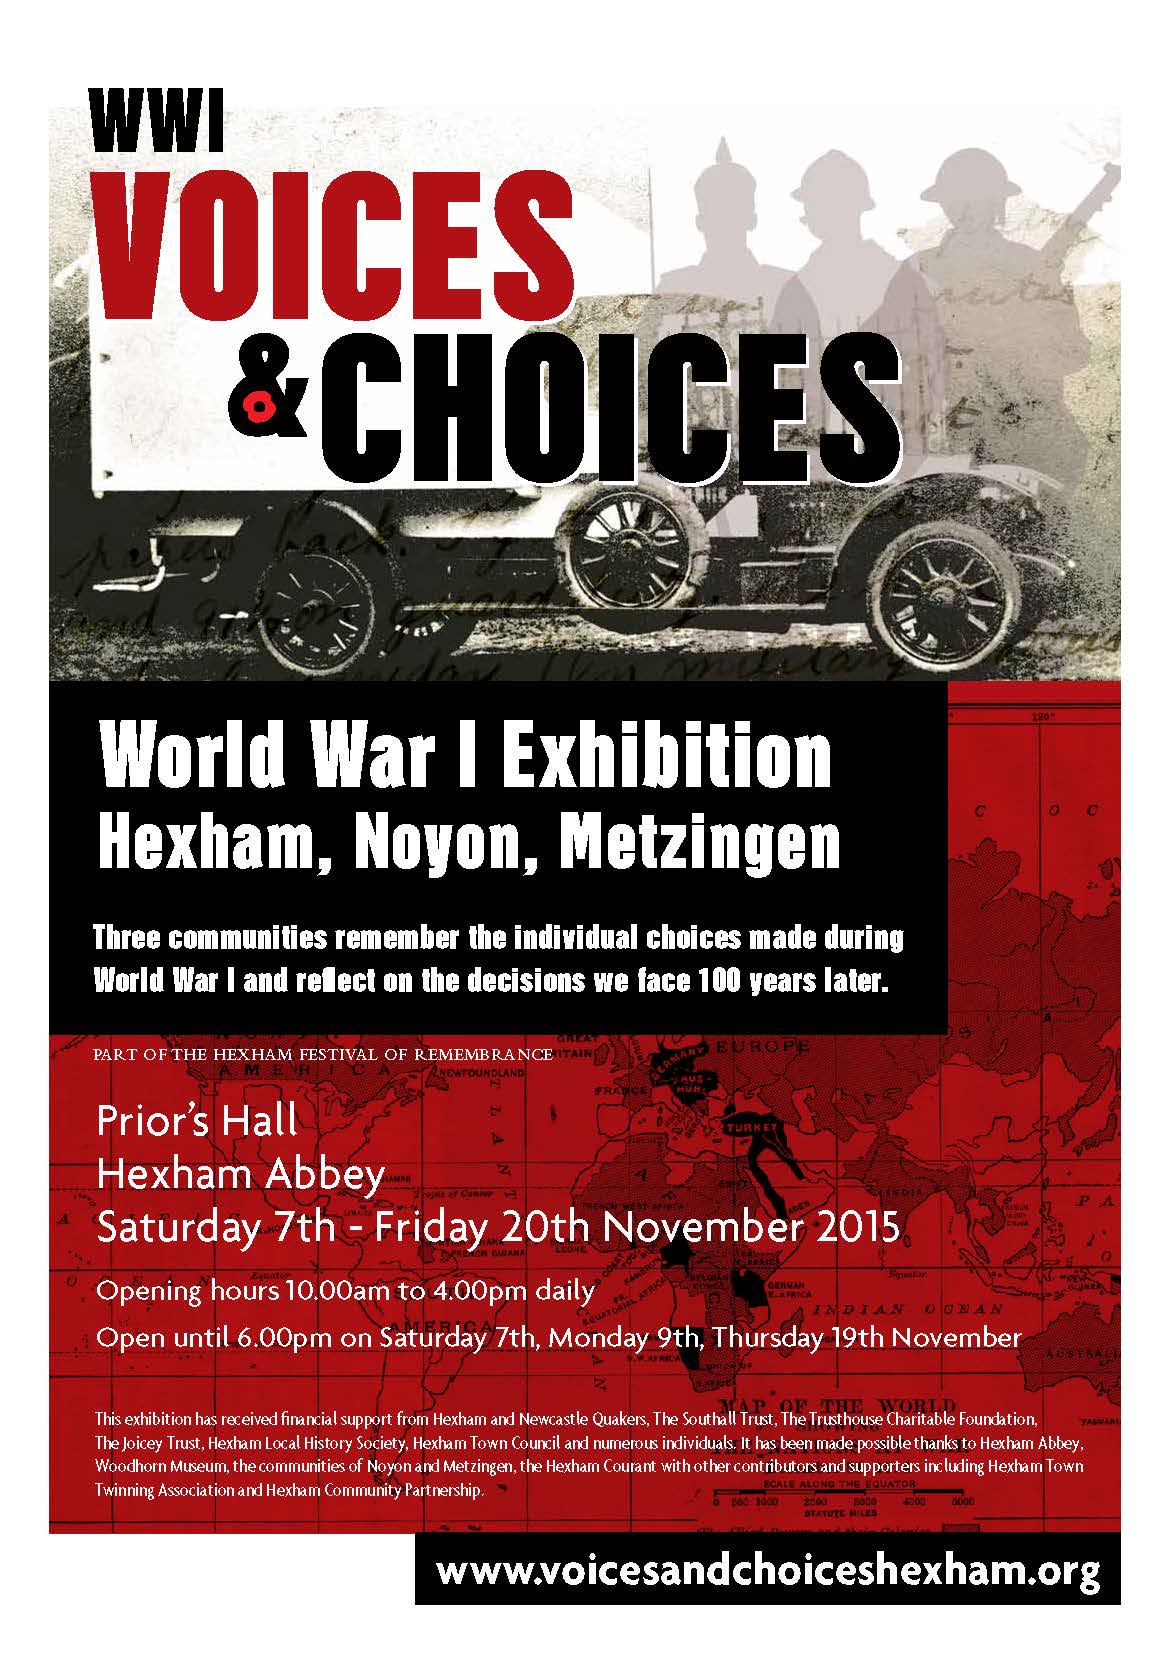 Voices and choices: World War I exhibition